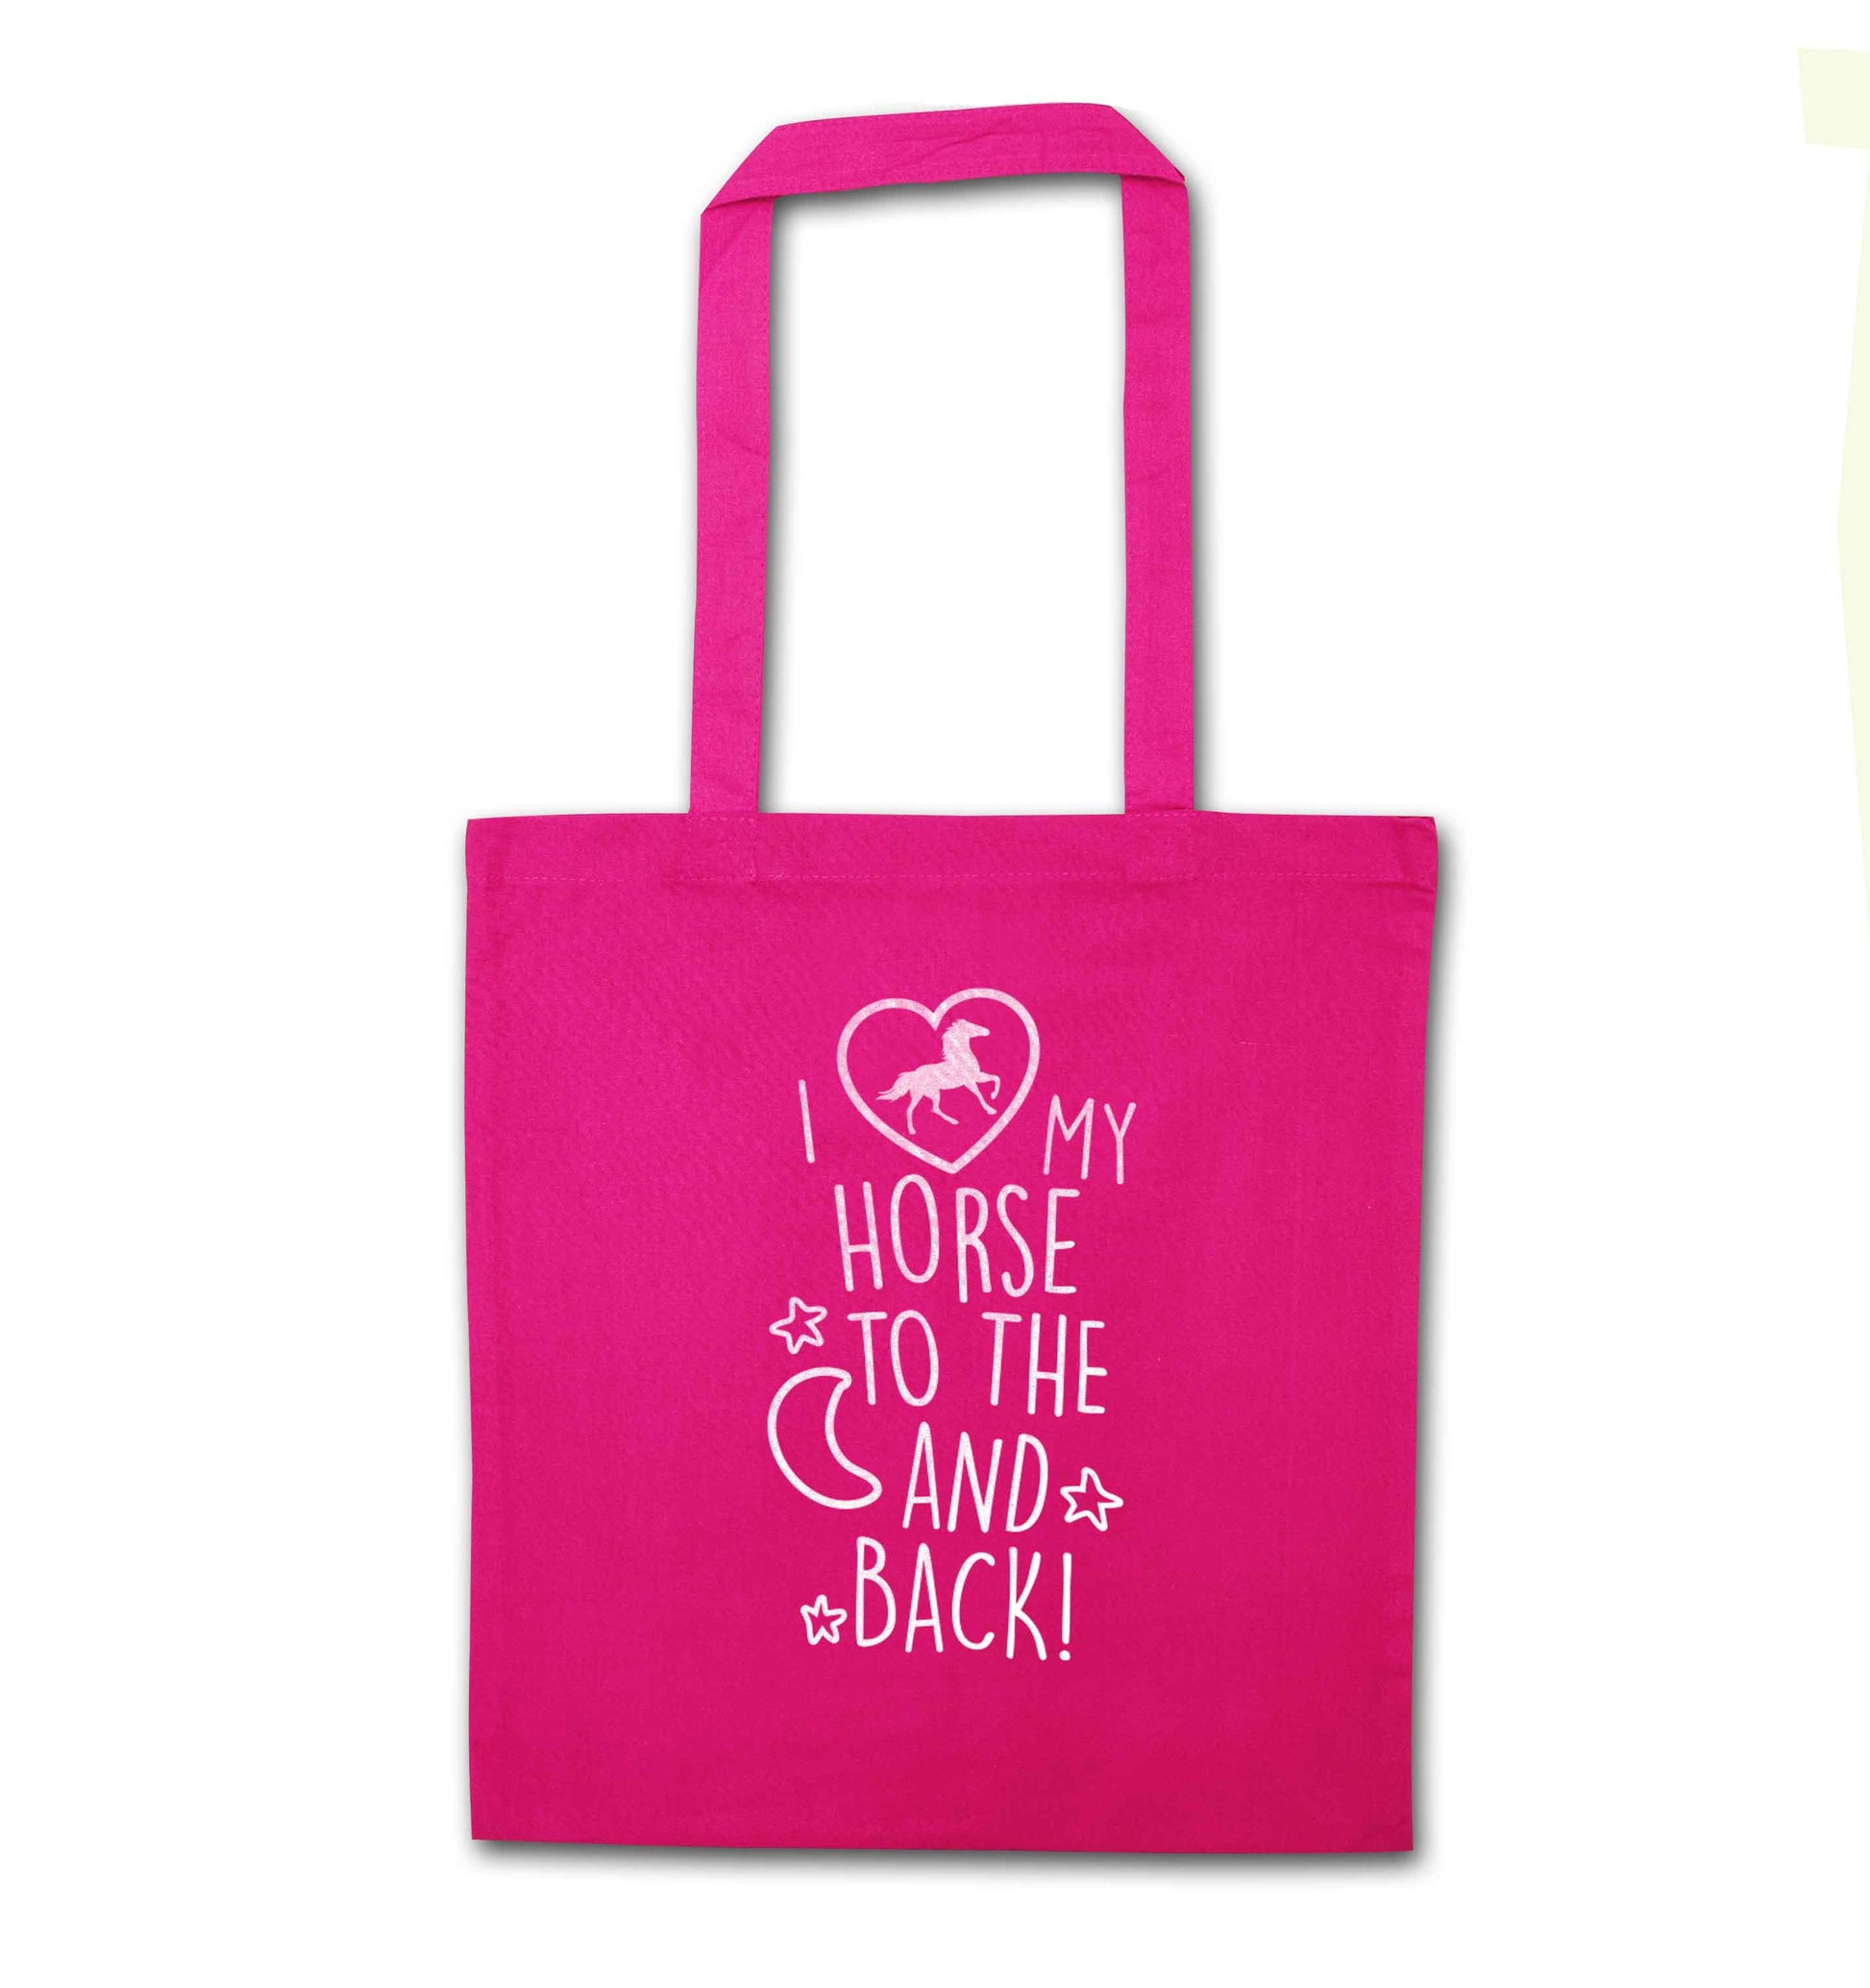 I love my horse to the moon and back pink tote bag